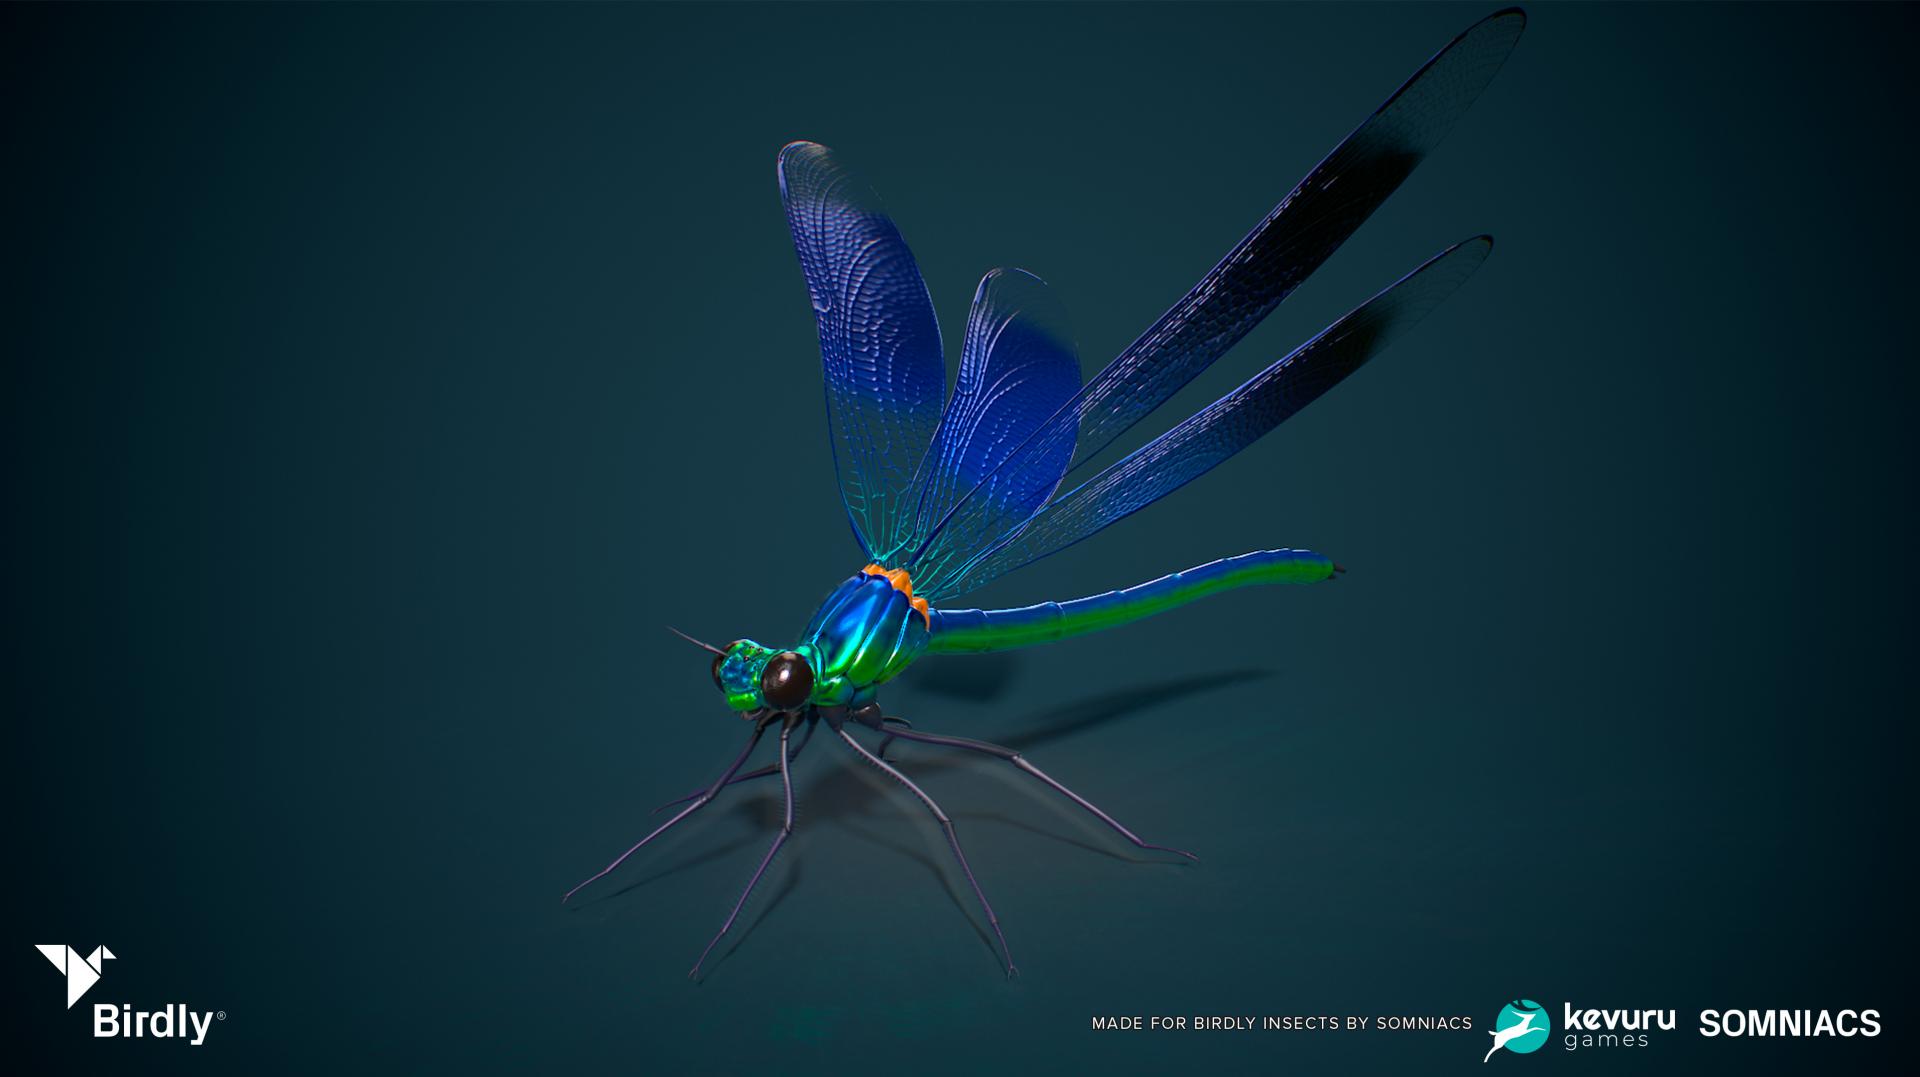 NYX Game Awards - Birdly Insects